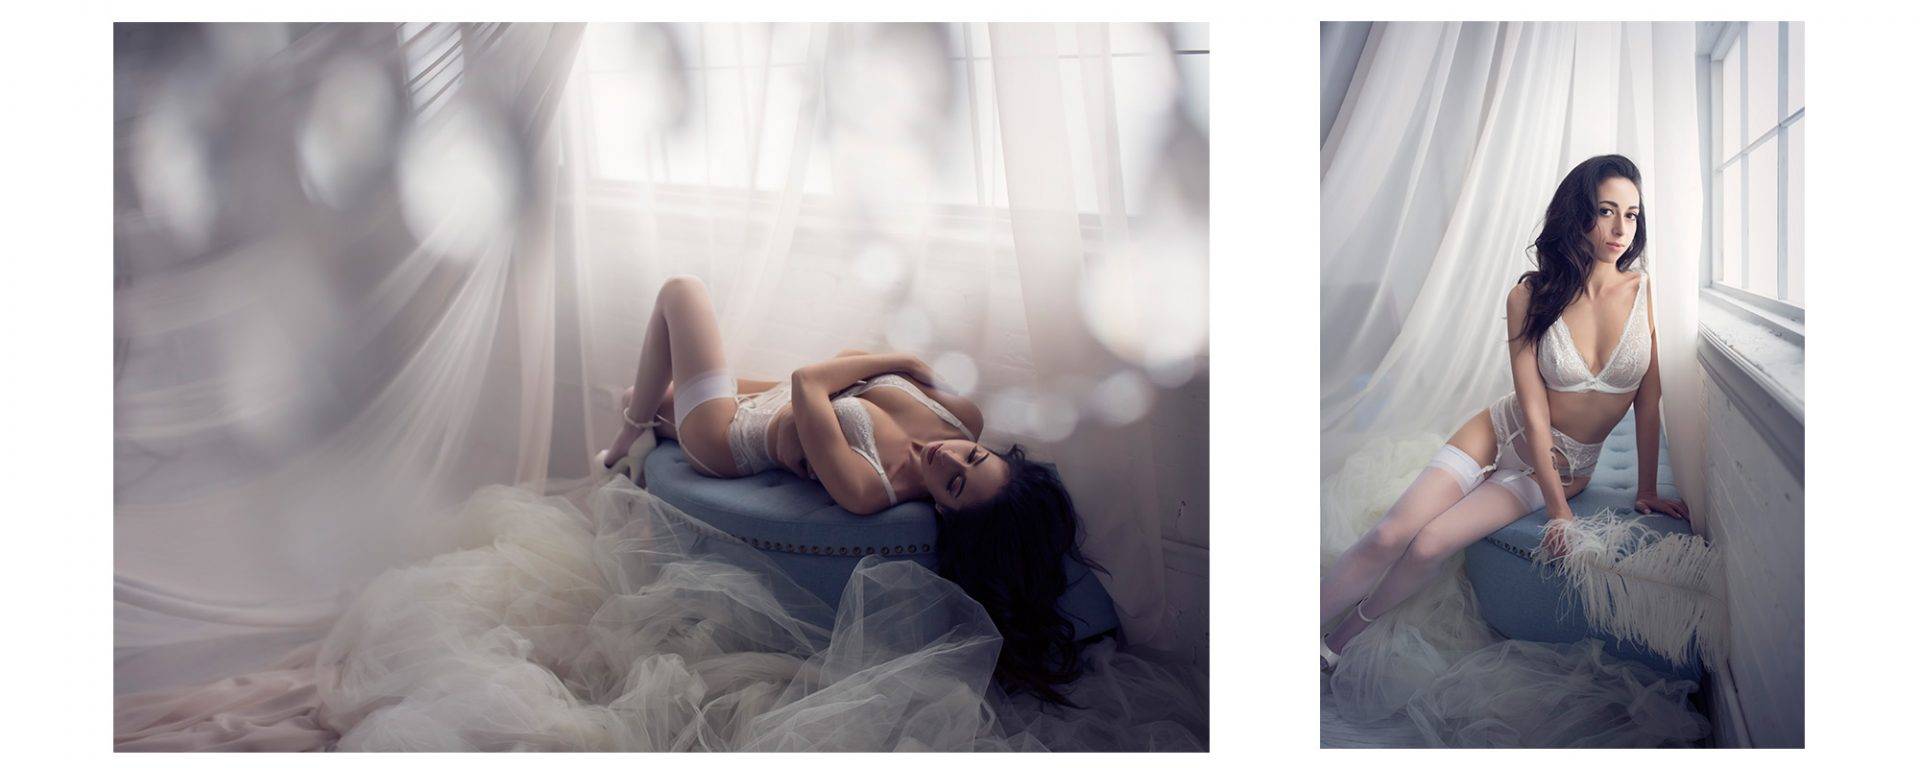 Boudoir photographer capture of bridal look of lady in white lingerie and stockings on a blue ottoman.